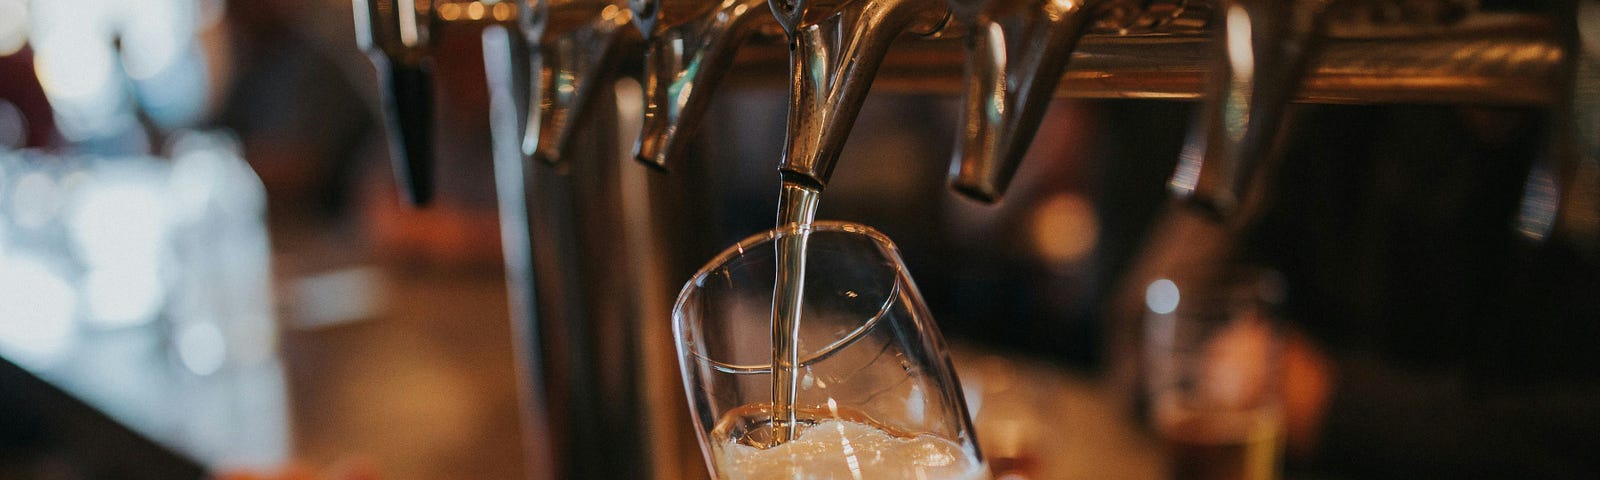 Filling up a glass with beer from the tap